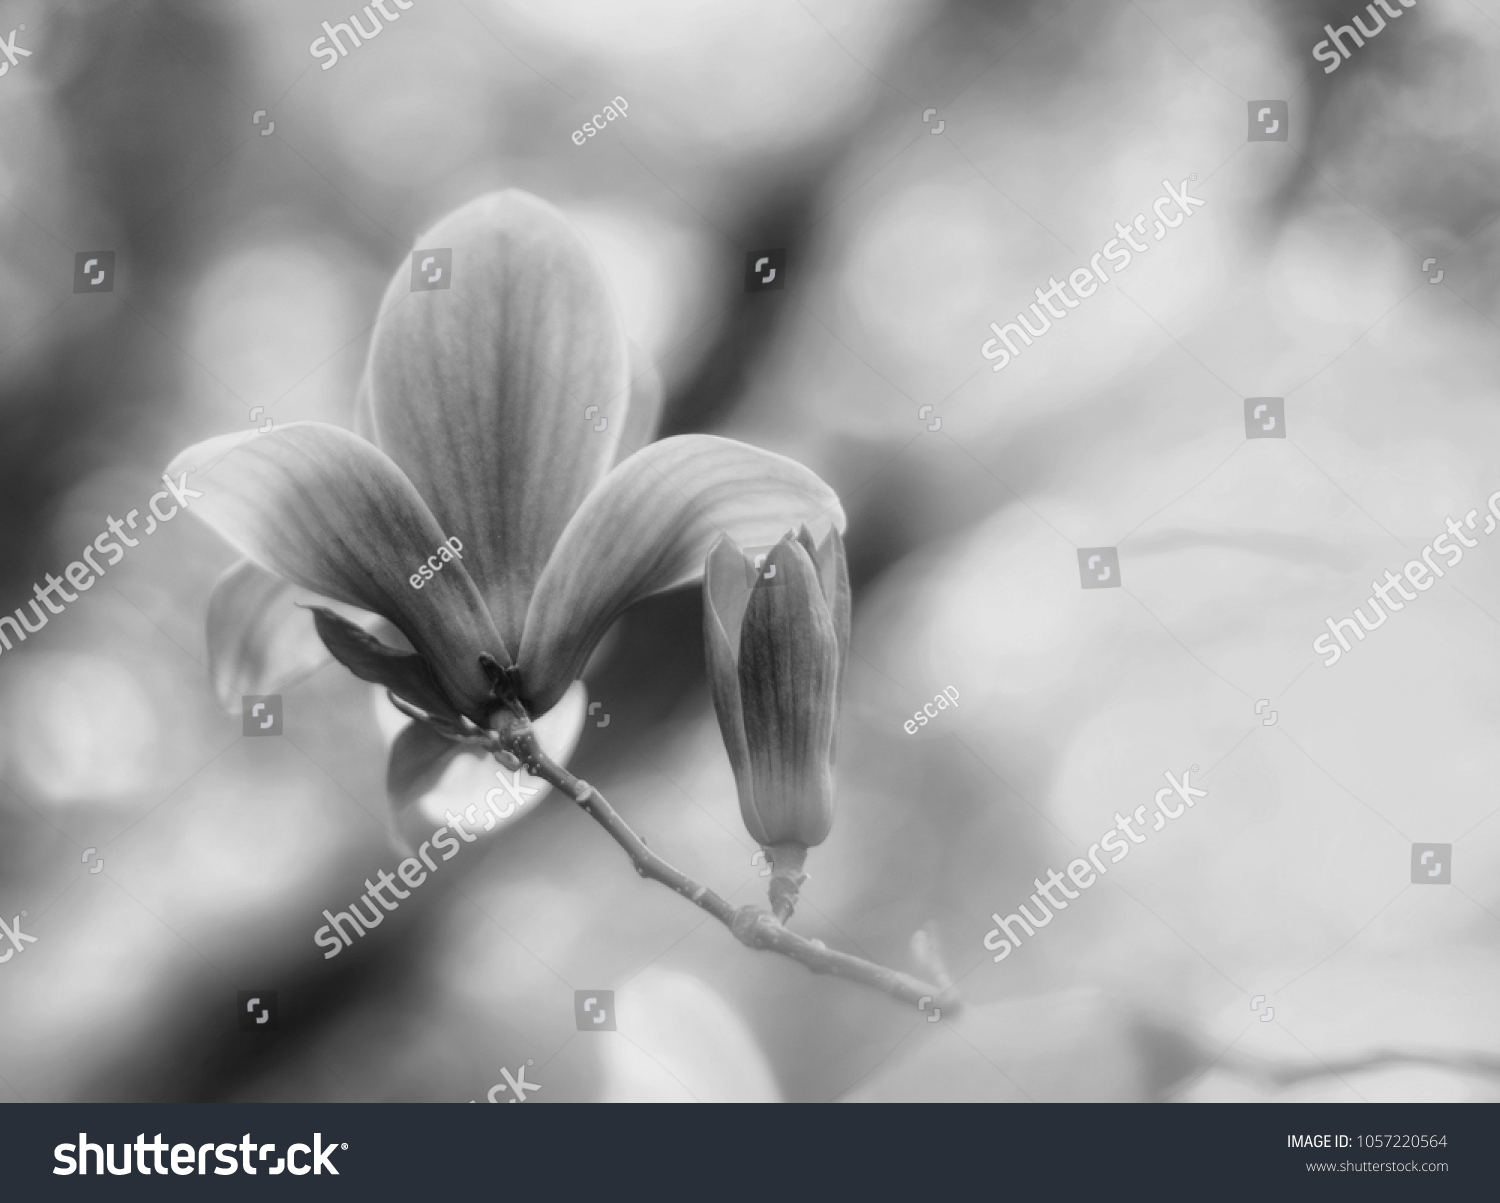 Black and white beautiful close up bloom of magnolia flowers. Blooming magnolia tree in the spring on the light and smooth background. Selective focus.  #1057220564